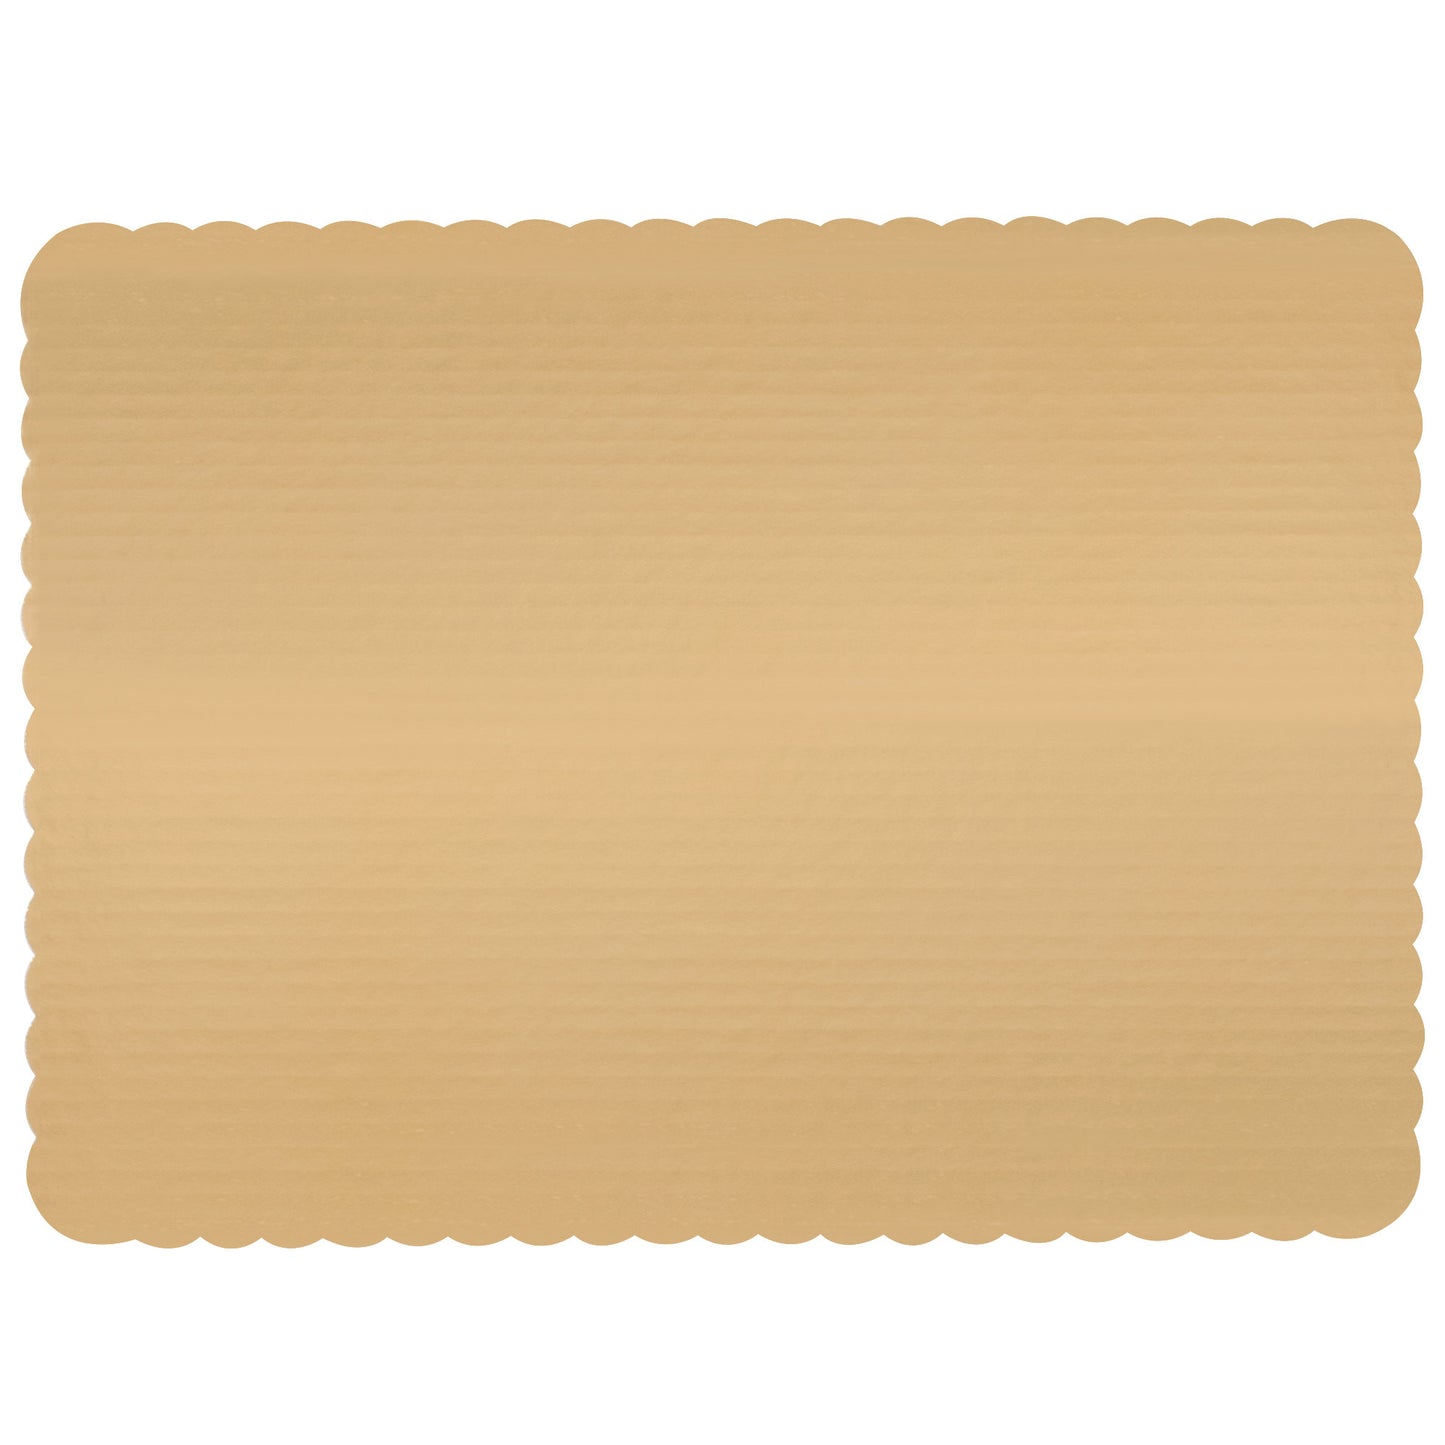 image shows a gold half sheet cake board with scalloped edges